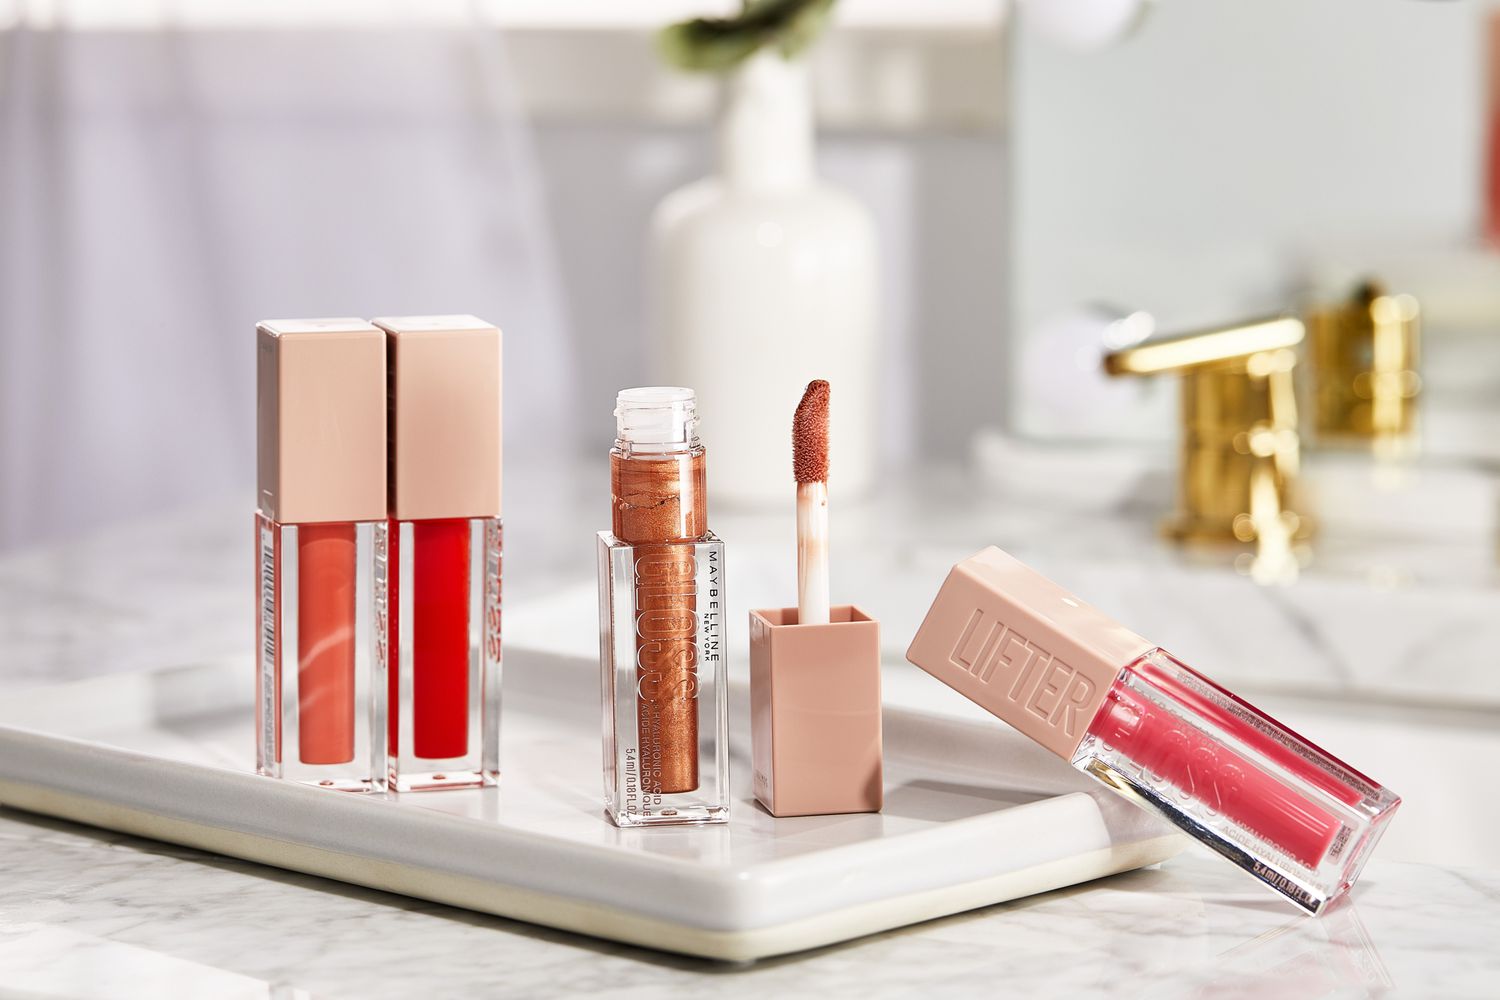 Lipstick Love: Maybelline's Range Of Shades And Styles